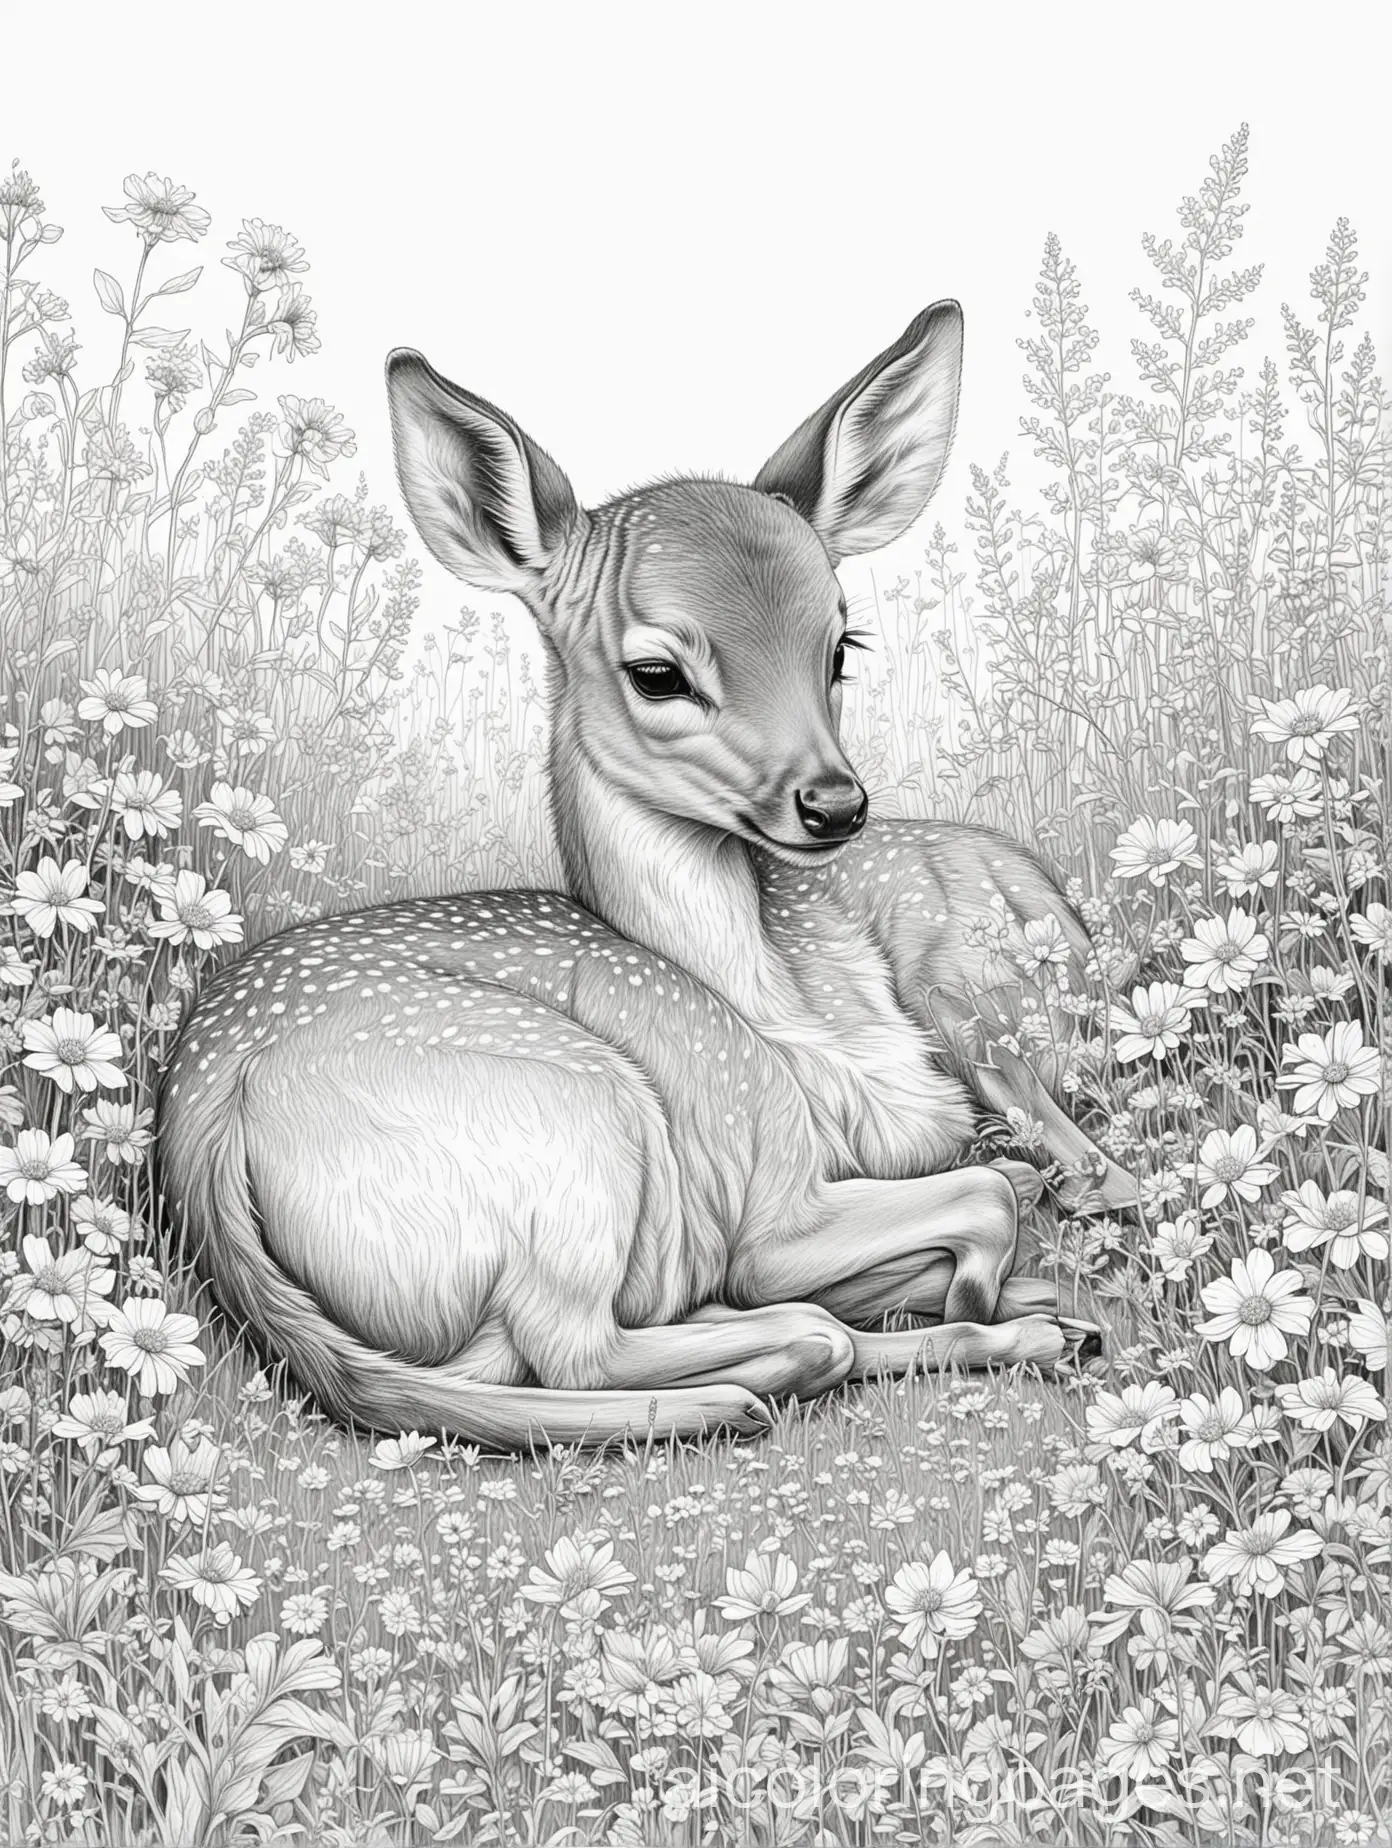 baby deer sleeping in a field of wildflowers, Coloring Page, black and white, line art, white background, Simplicity, Ample White Space. The background of the coloring page is plain white to make it easy for young children to color within the lines. The outlines of all the subjects are easy to distinguish, making it simple for kids to color without too much difficulty